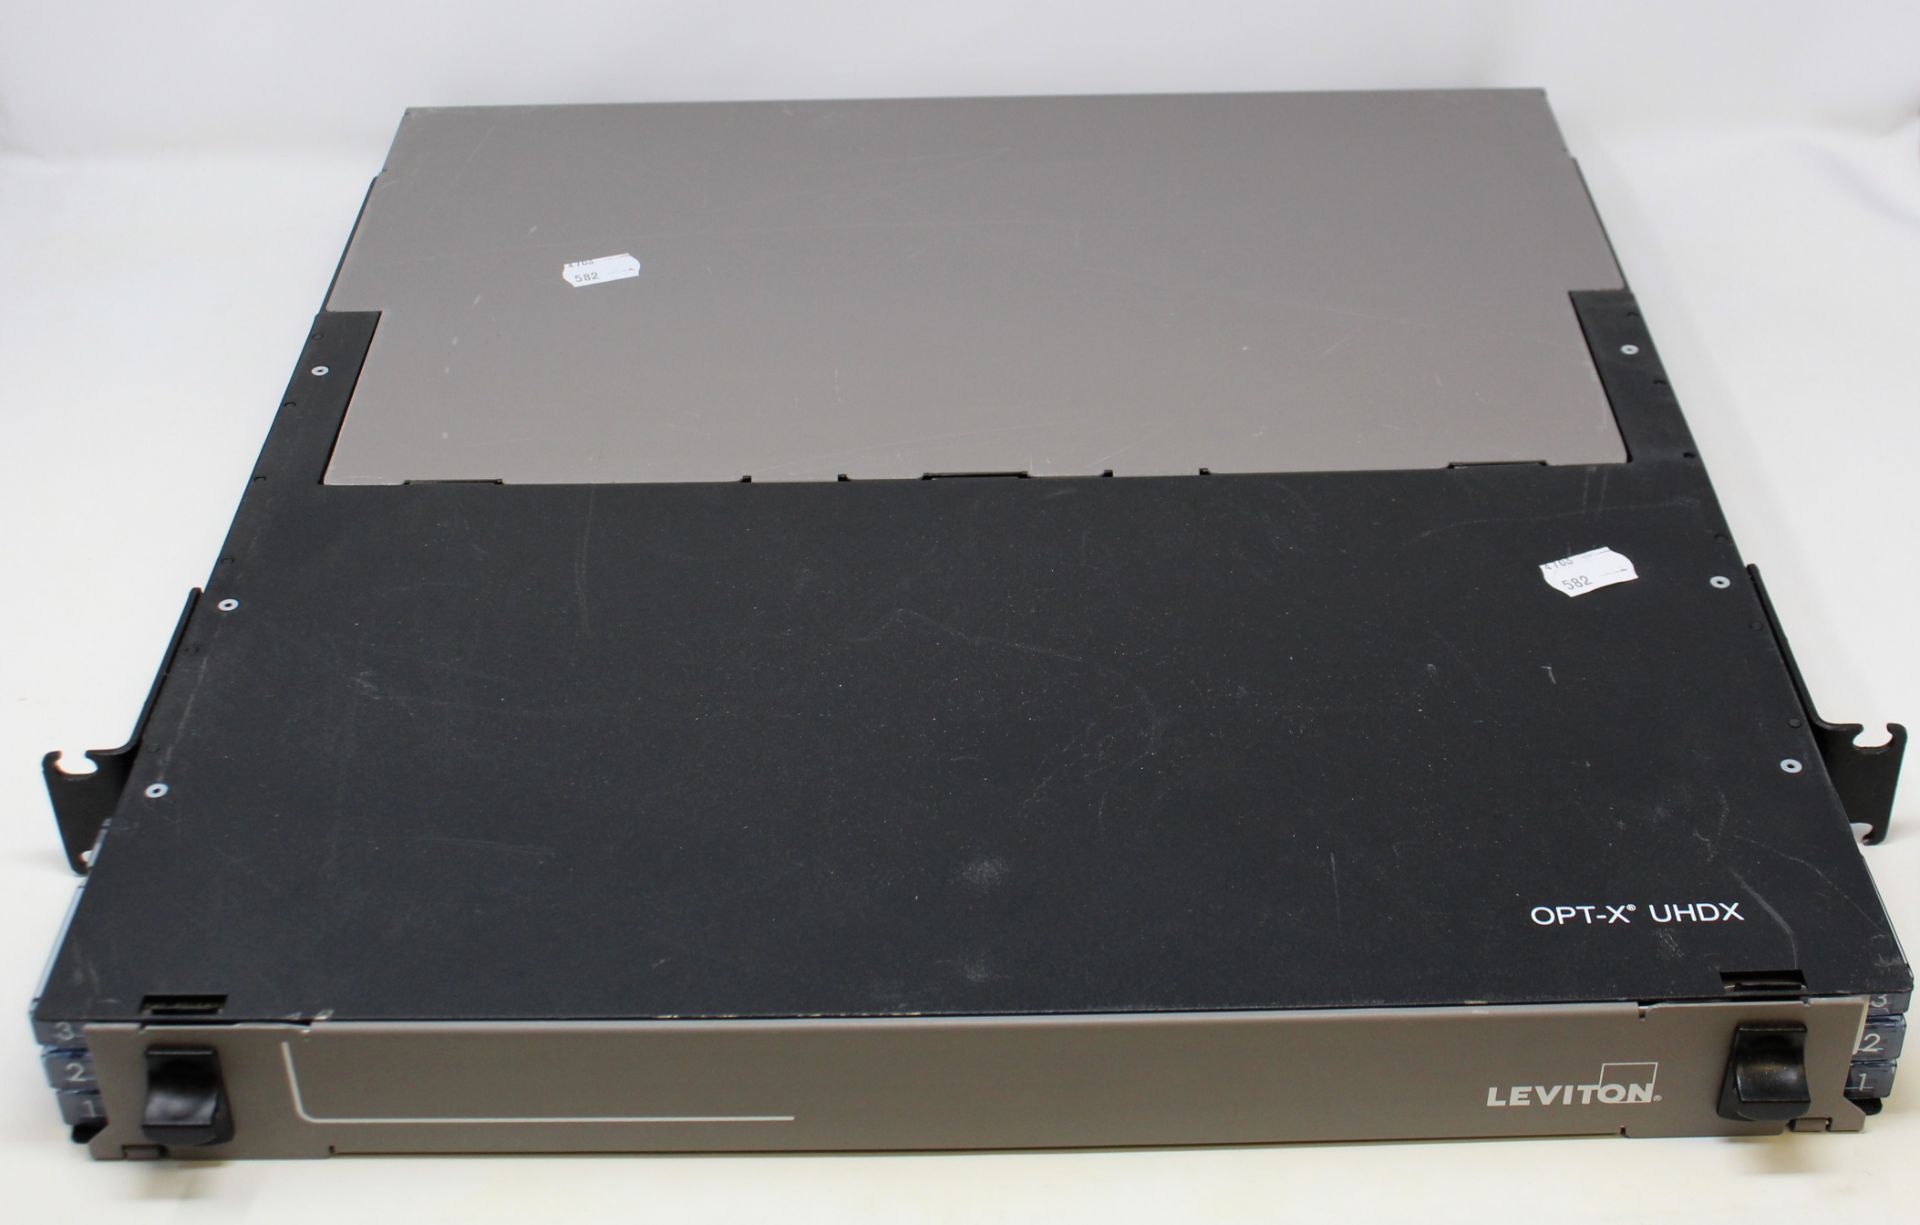 A pre-owned Leviton OPT-X UHDX 1RU Fiber Enclosure (Untested, sold as seen).